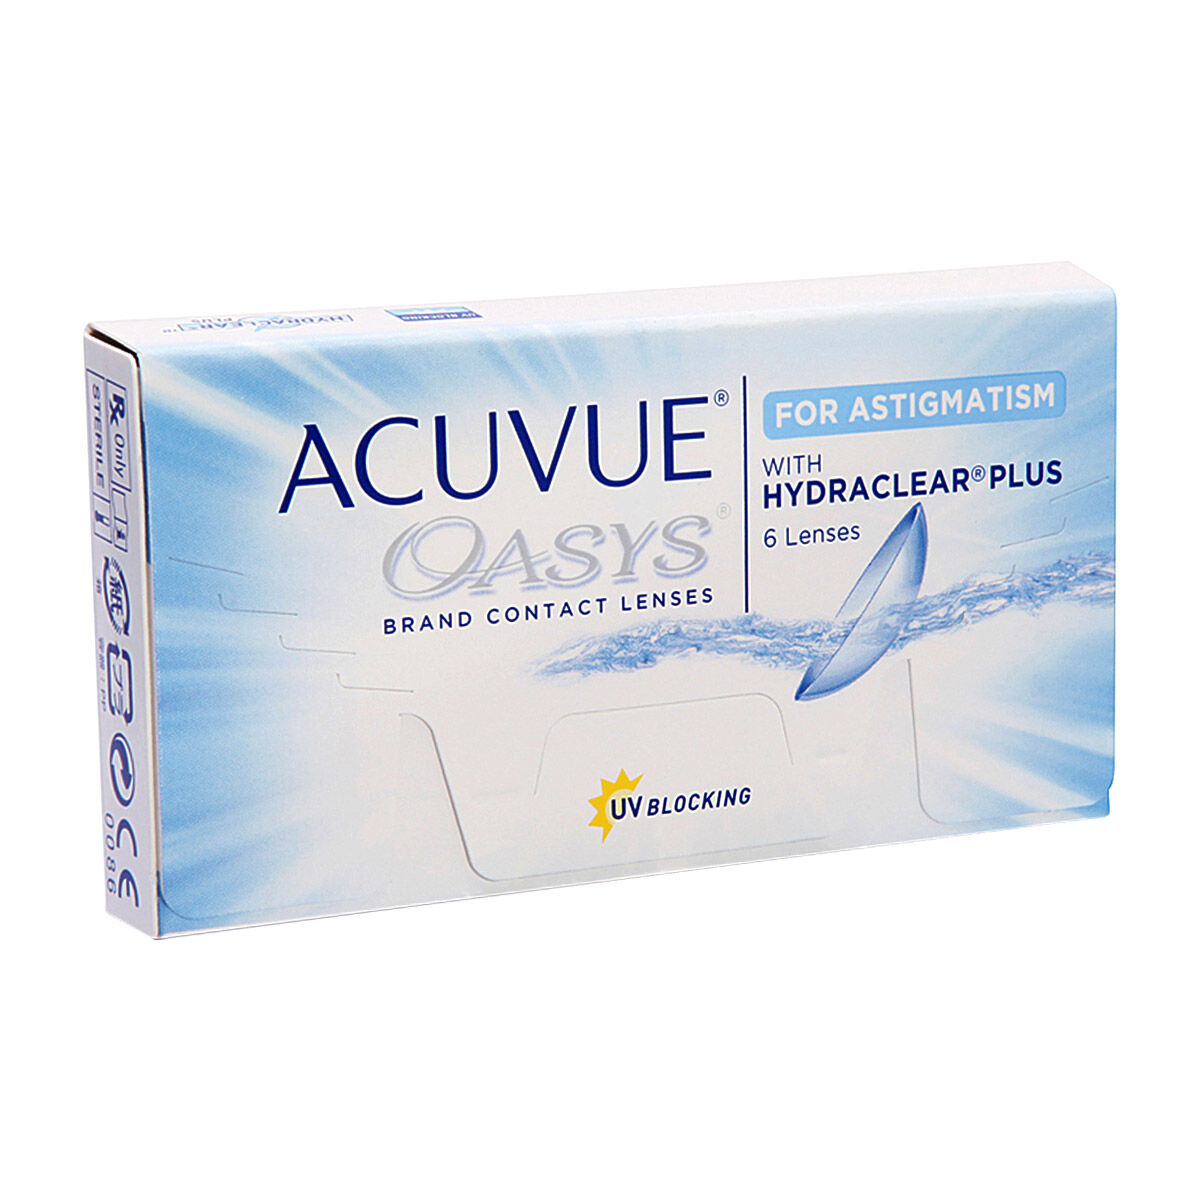 Acuvue Oasys for Astigmatism (6 Contact Lenses), Johnson & Johnson, Two Weekly Toric Lenses, Senofilcon A